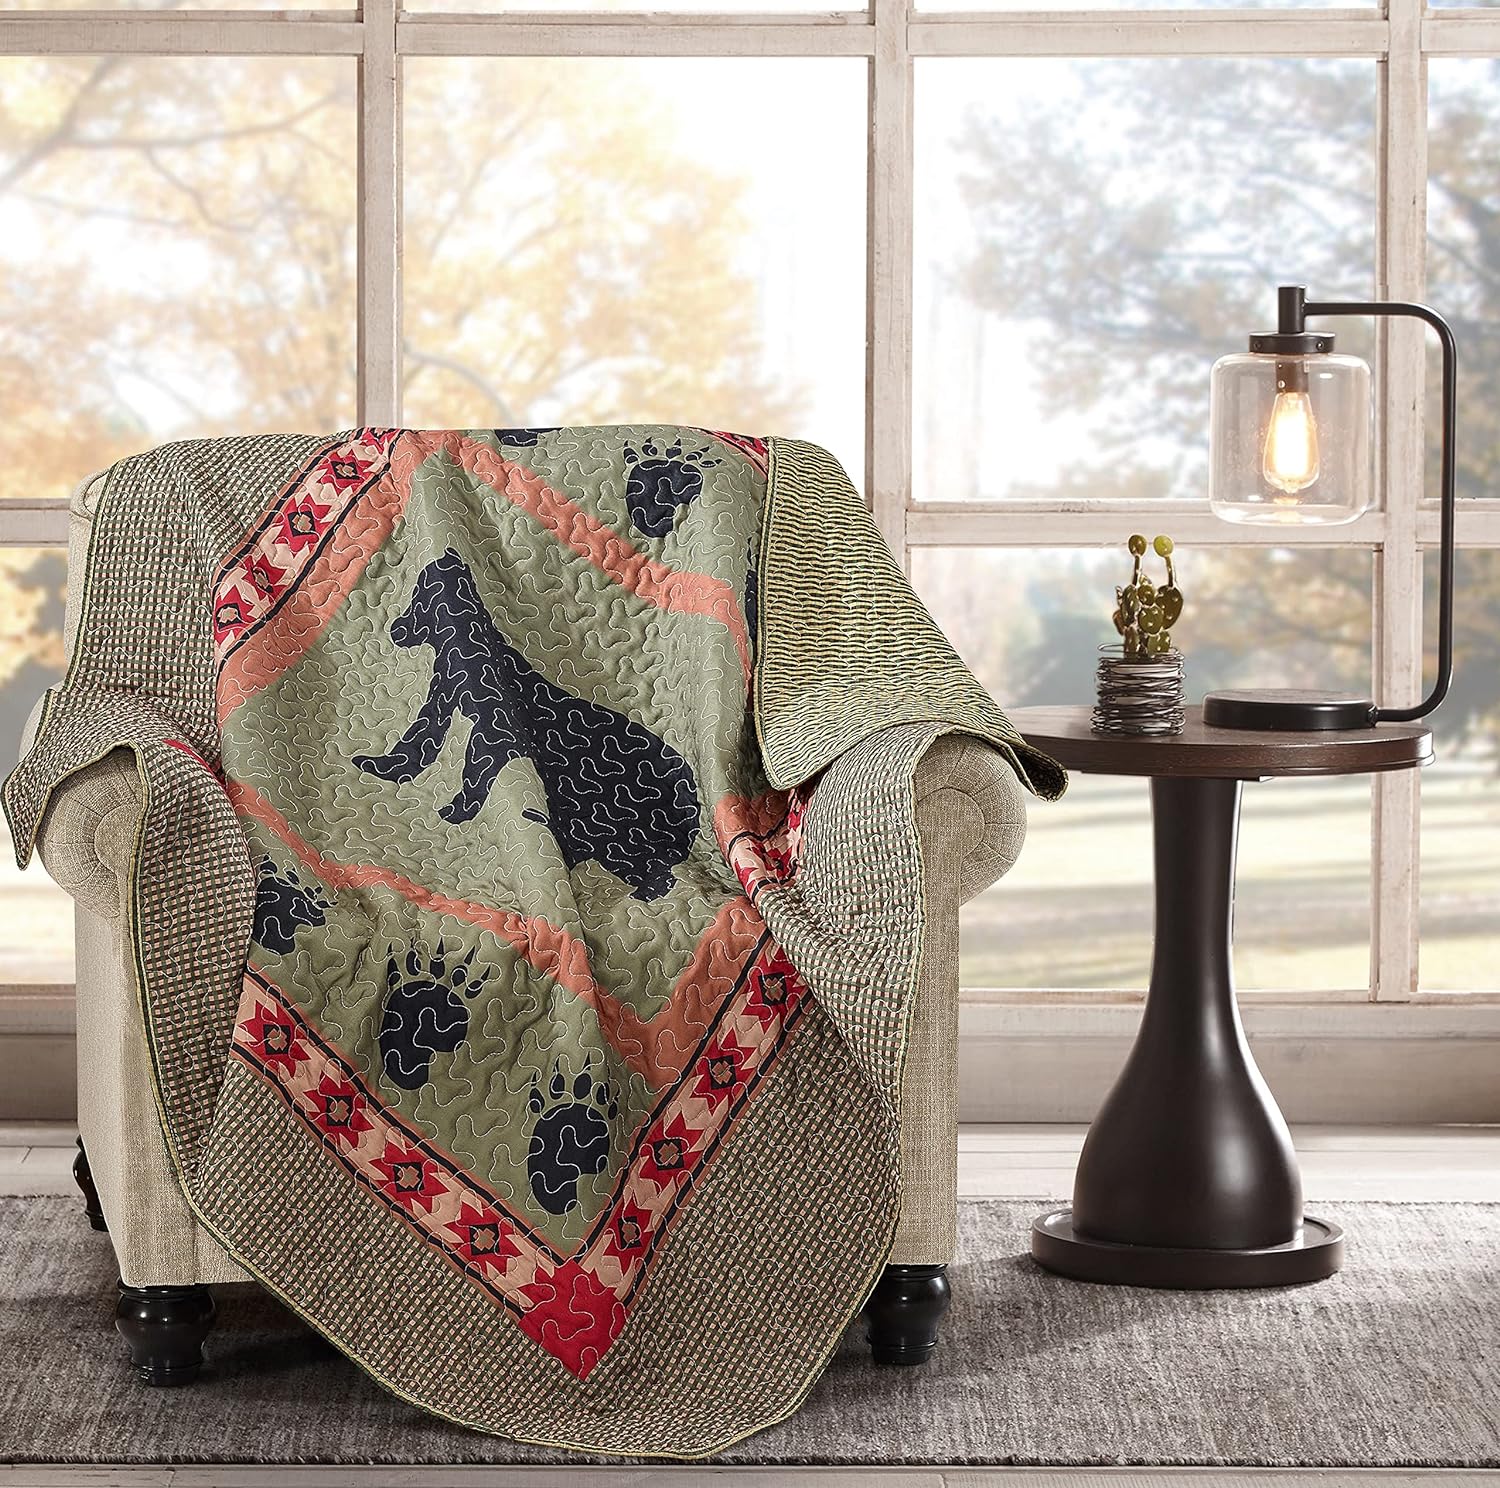 Virah Bella Quilted Bear Throw Blanket for Couch - 50" x 60" - Bear and Paw Lodge-Themed Throw Quilt